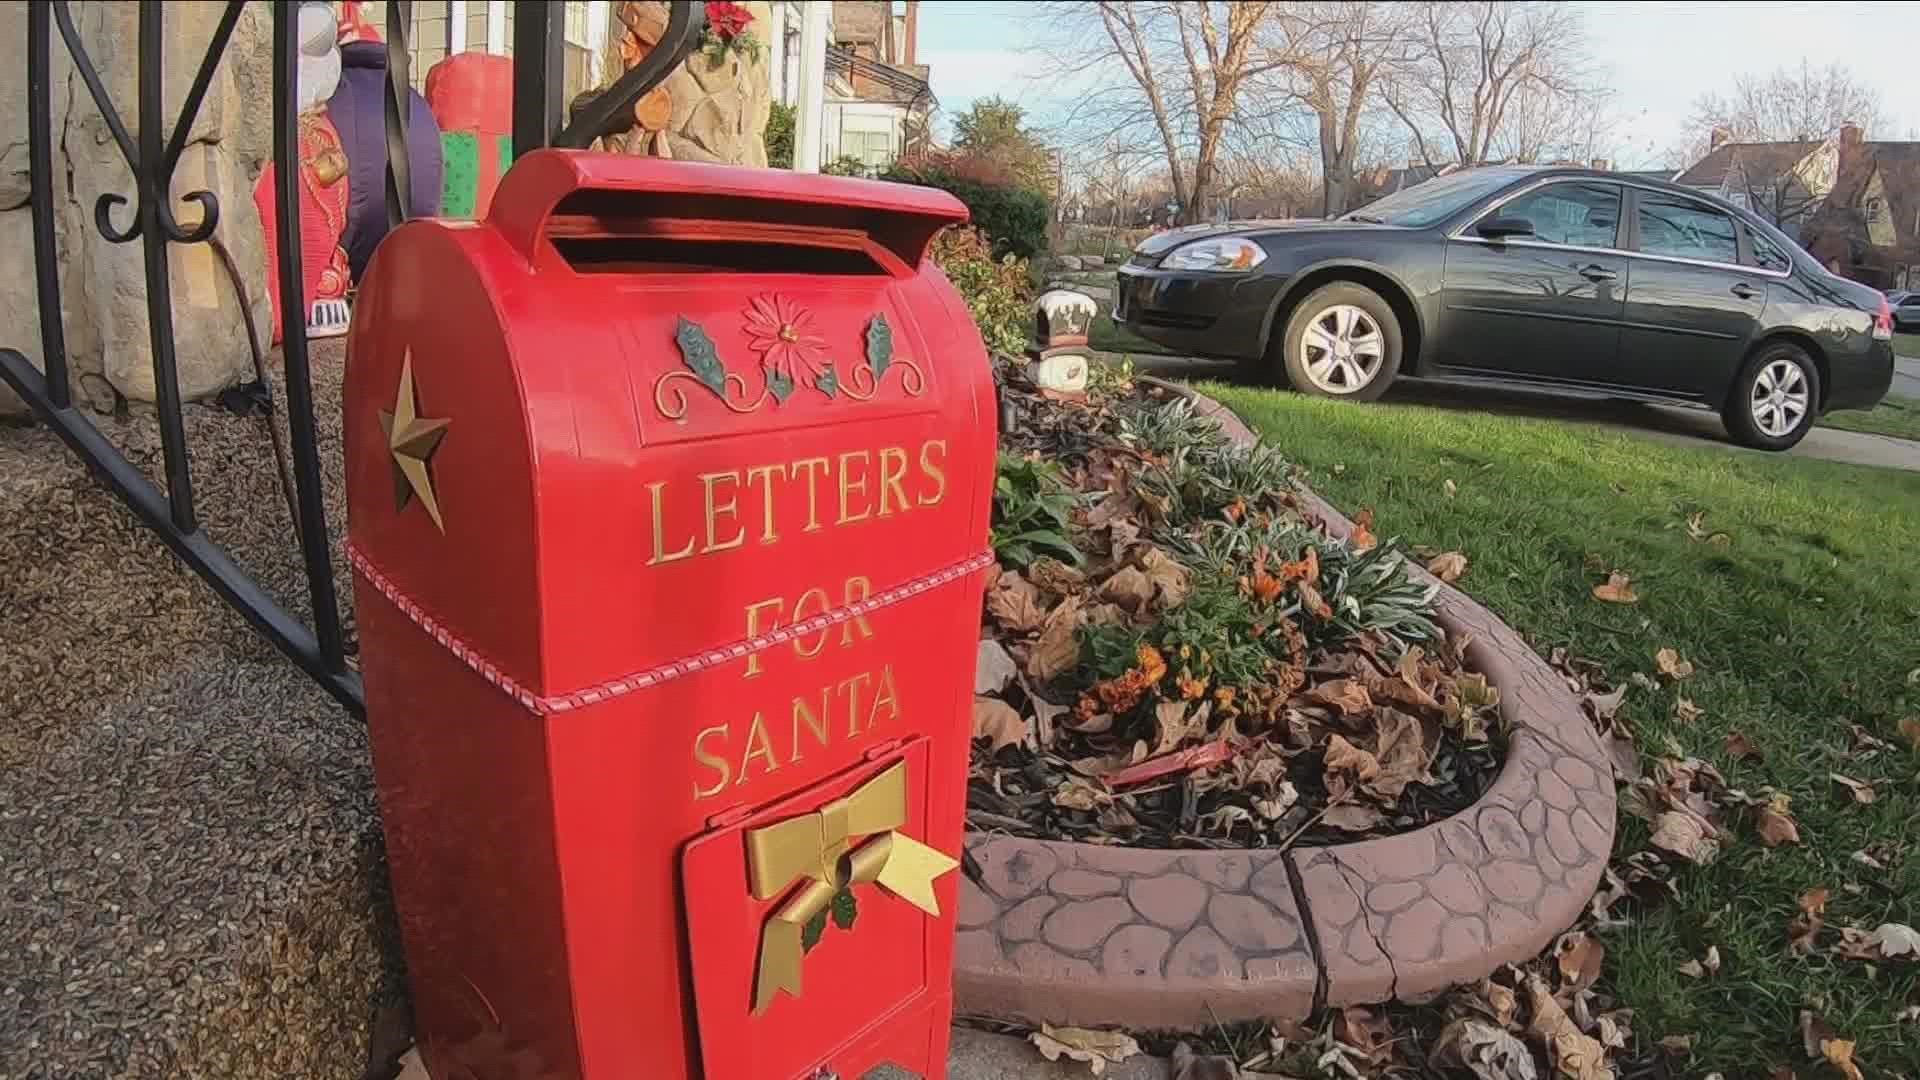 Lisa Brown set up the mailbox for her grandchildren,  but now the tradition continues for the whole community.